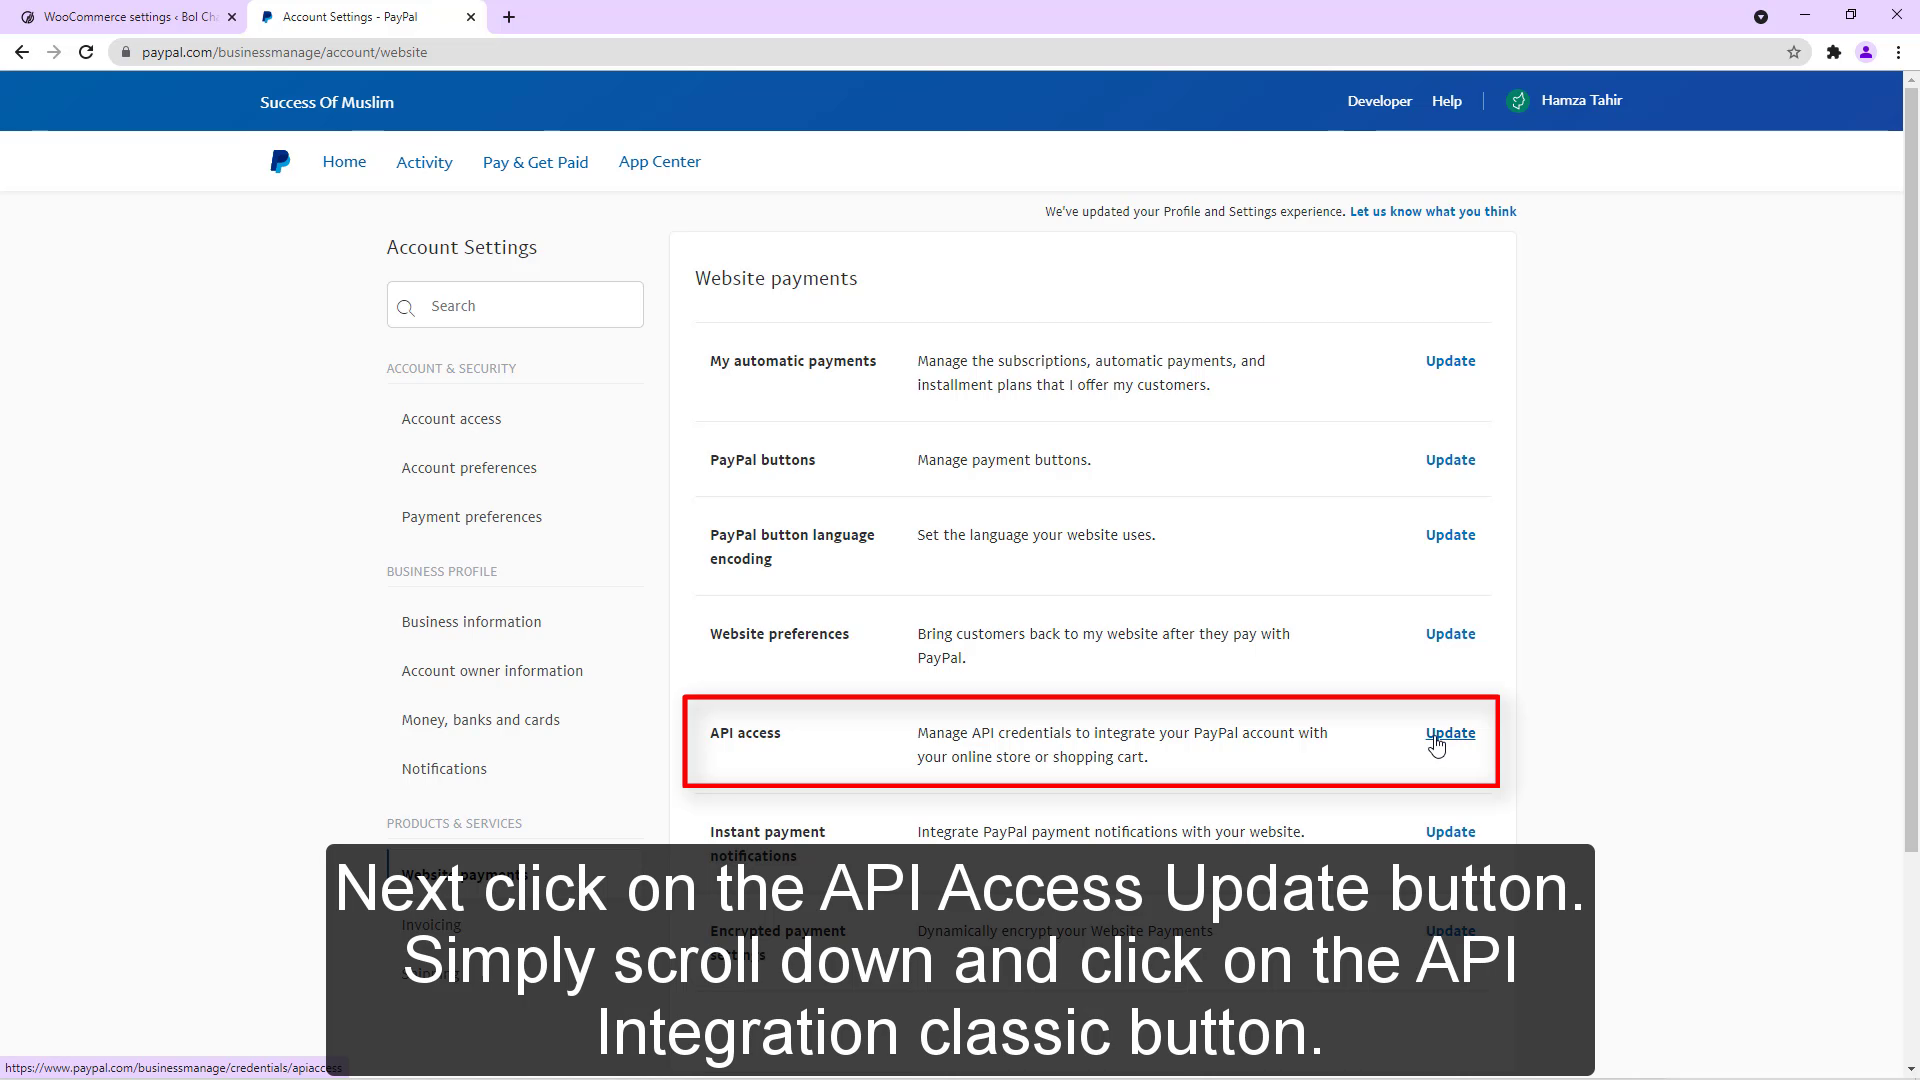 Next click on the API Access Update button